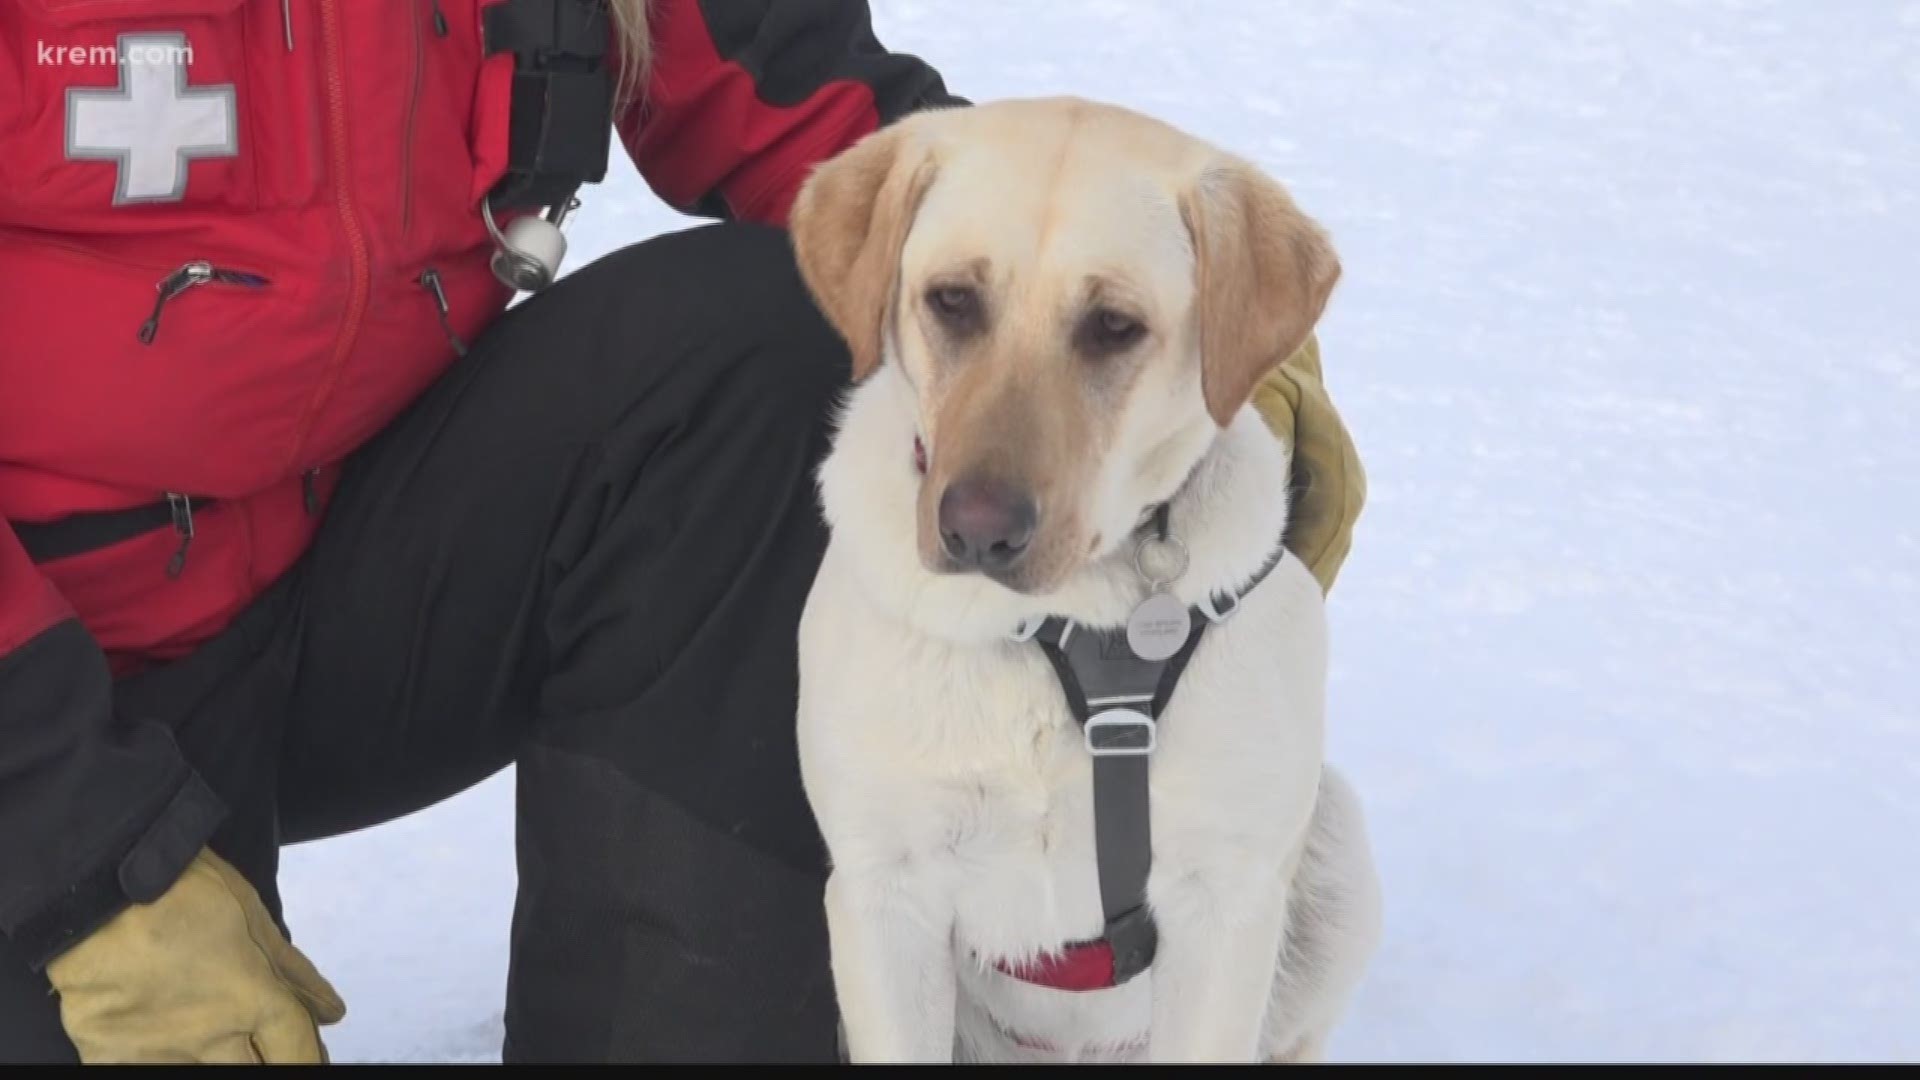 You might remember Murphy as a tiny yellow lab puppy. She was born in February 2018 and is now training to be an avalanche rescue dog.